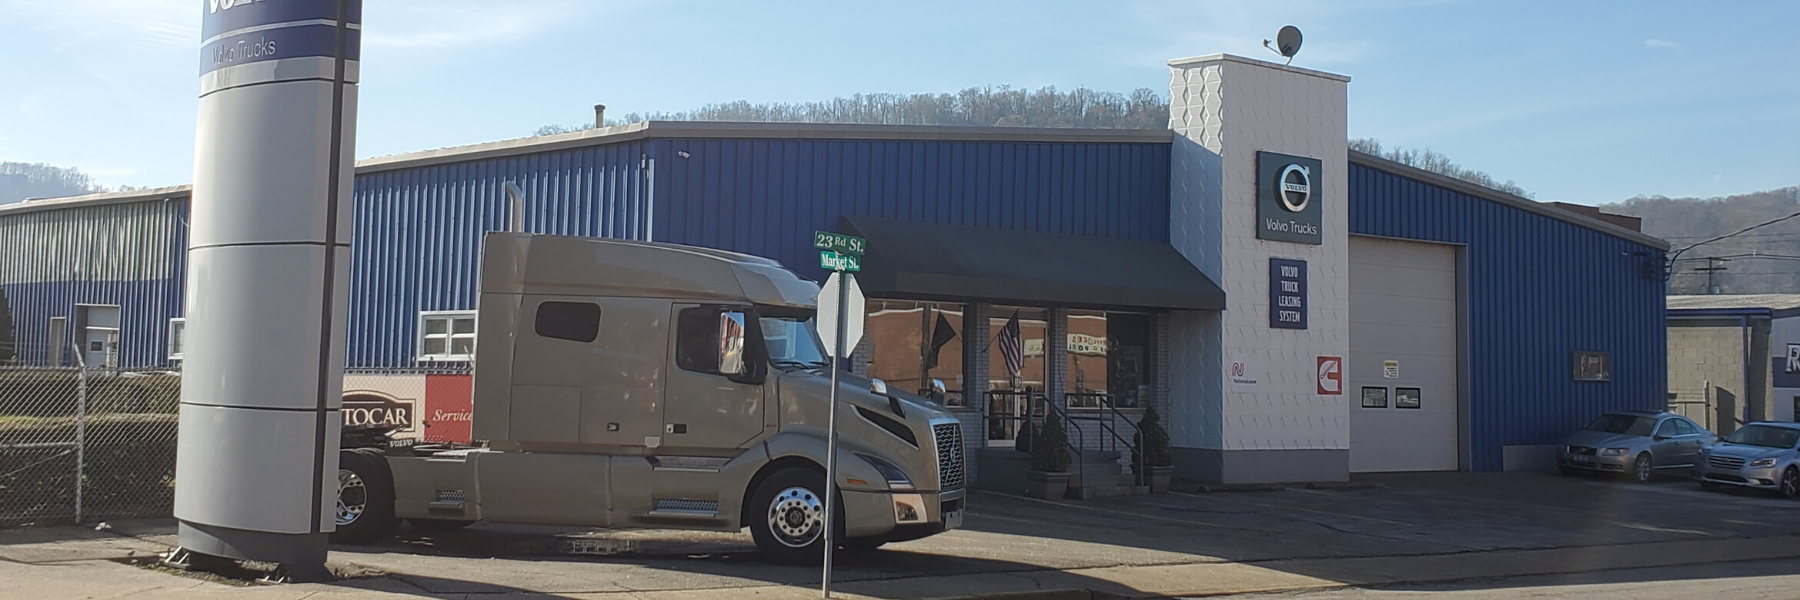 Legacy Truck Centers, Inc. Location in Wheeling, WV